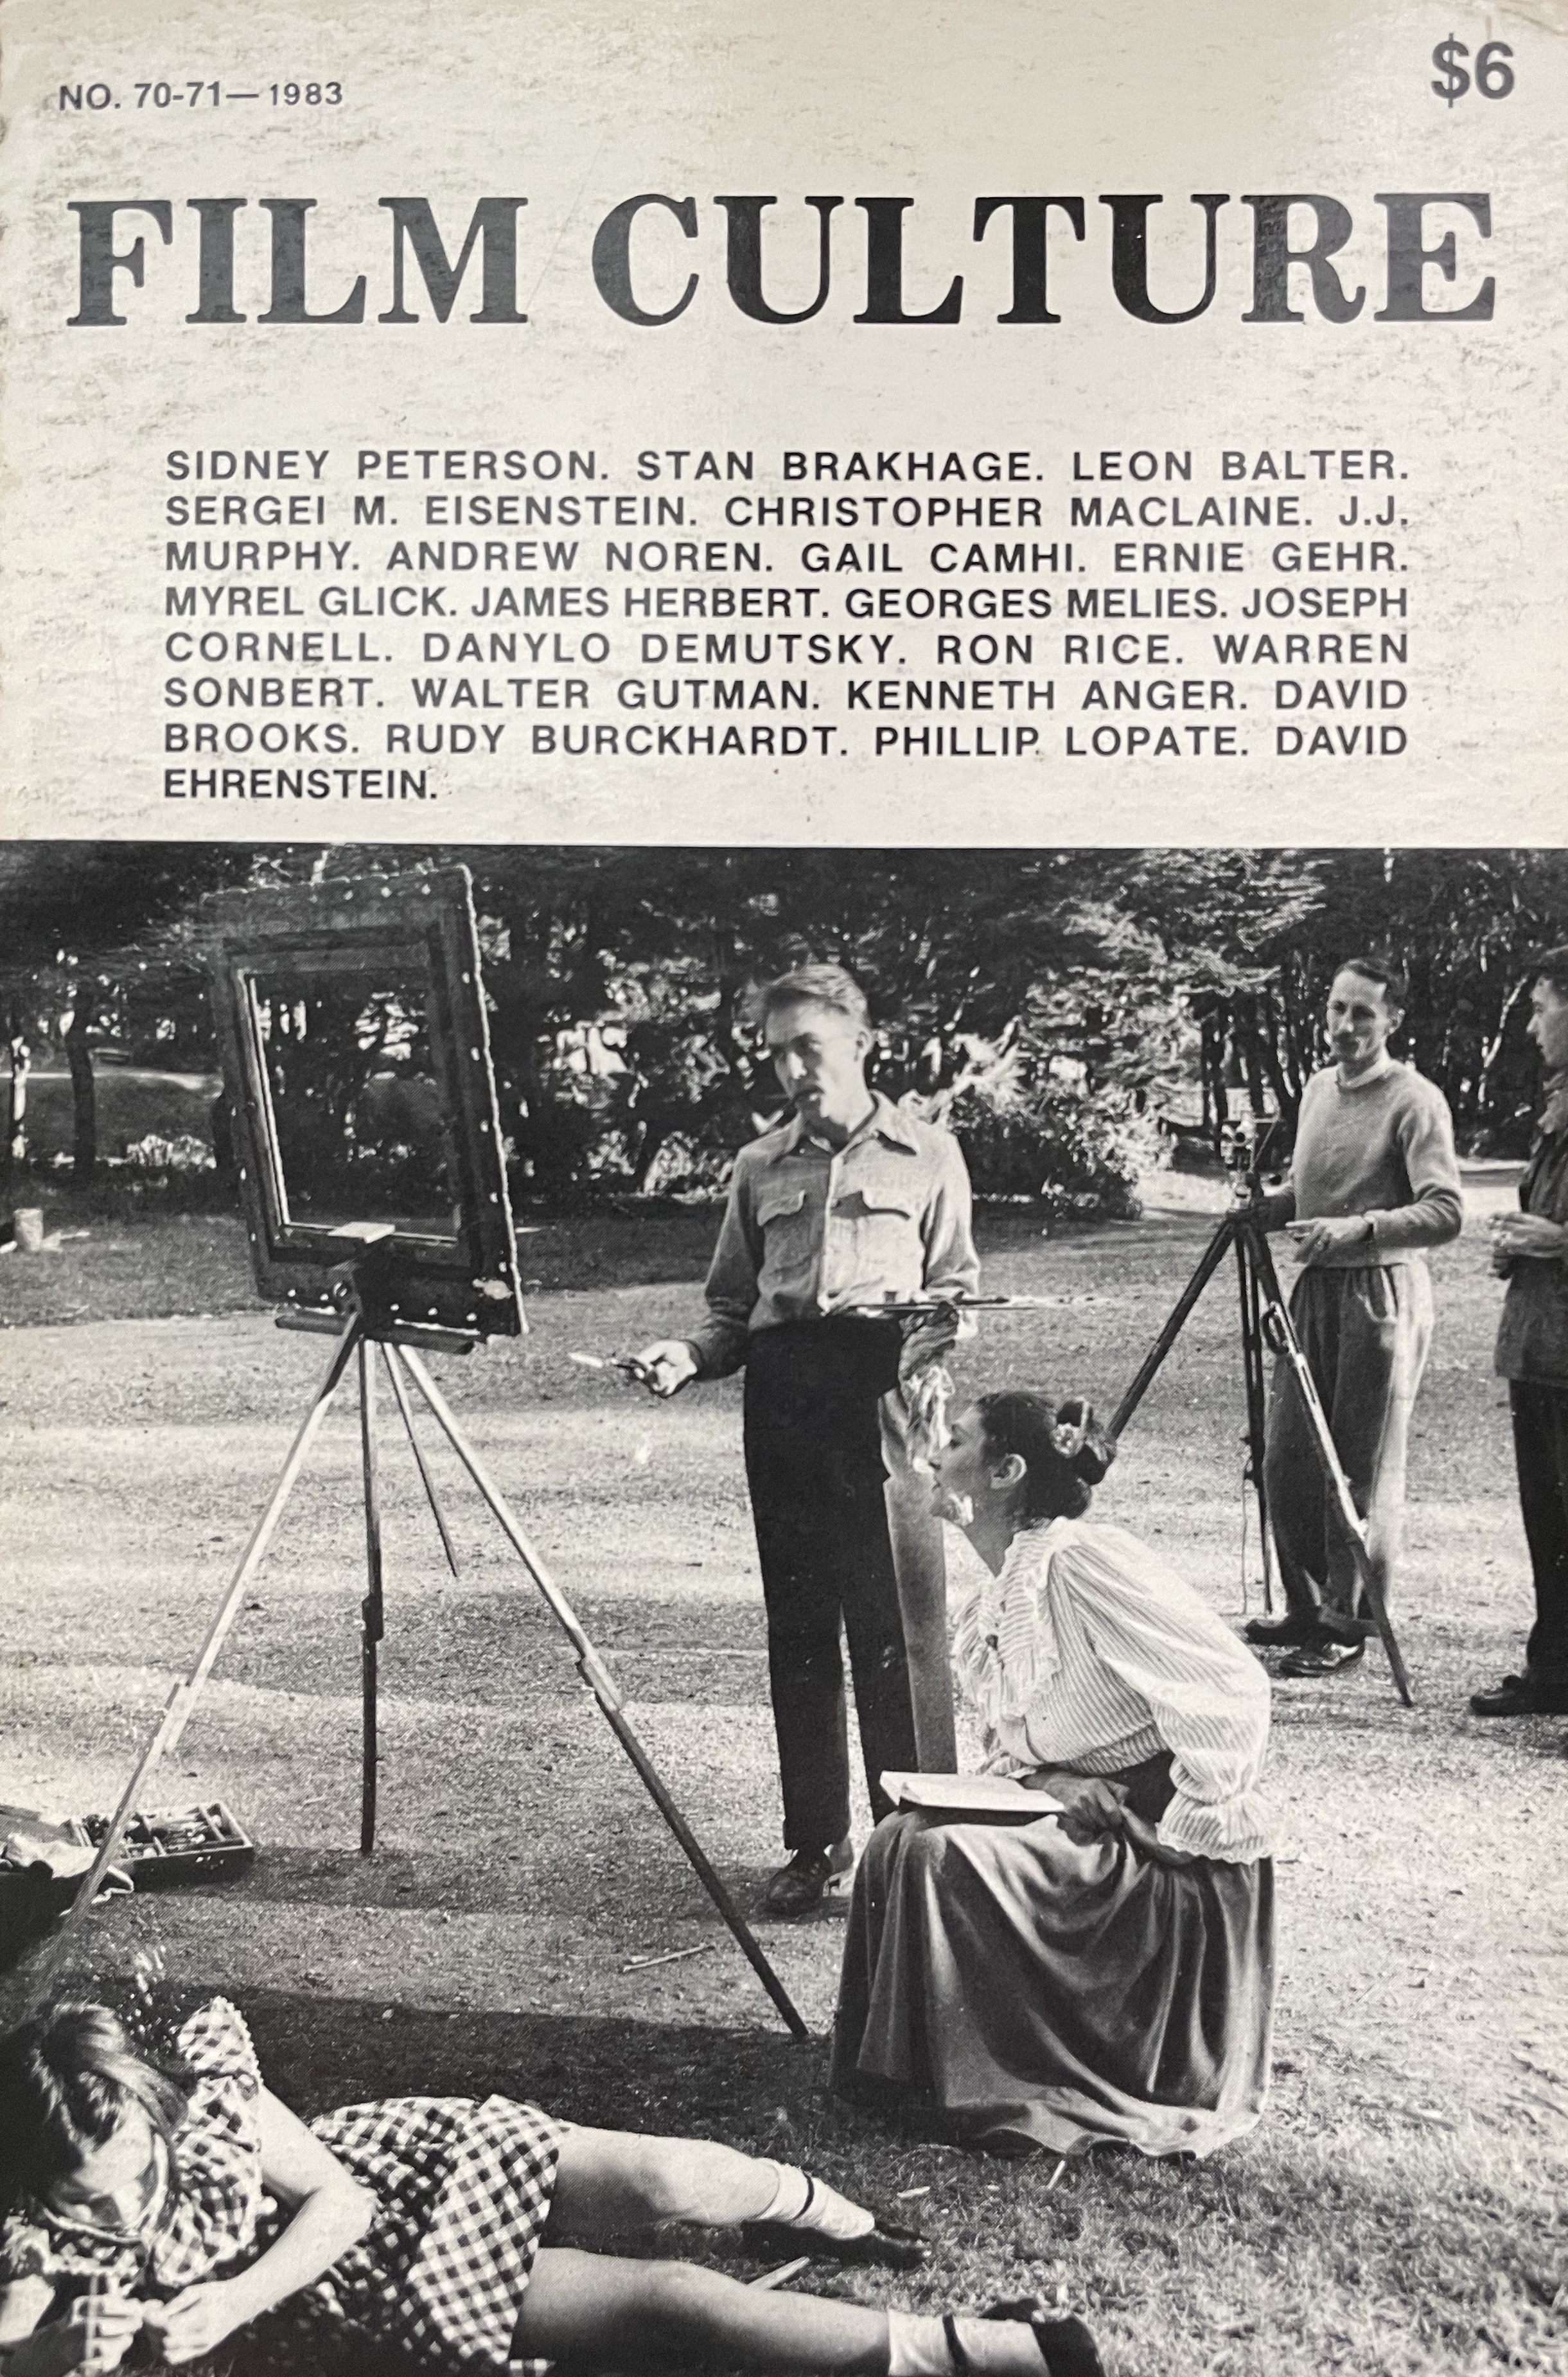 Cover to Film Culture 70-71 double issue featuring a photo of Sidney Peterson filming